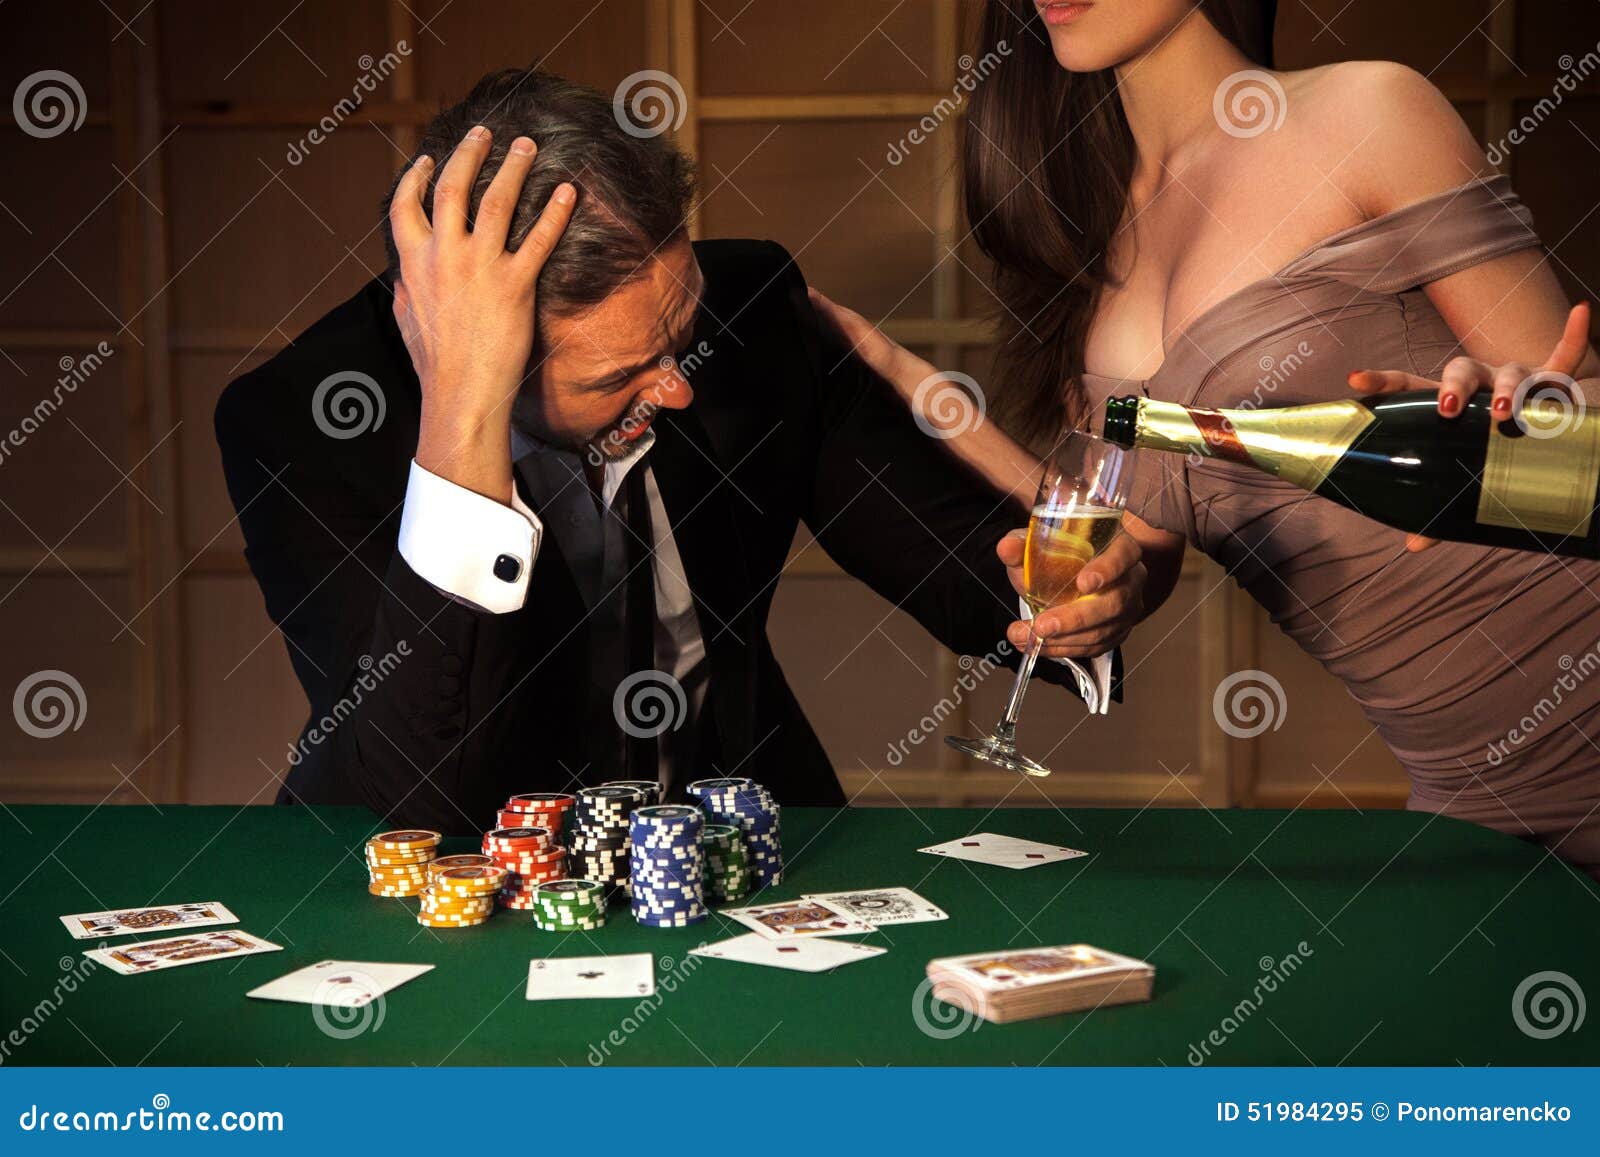 Photo Emotional Man Loser In Poker And Ladies Pours Him A Glas pic